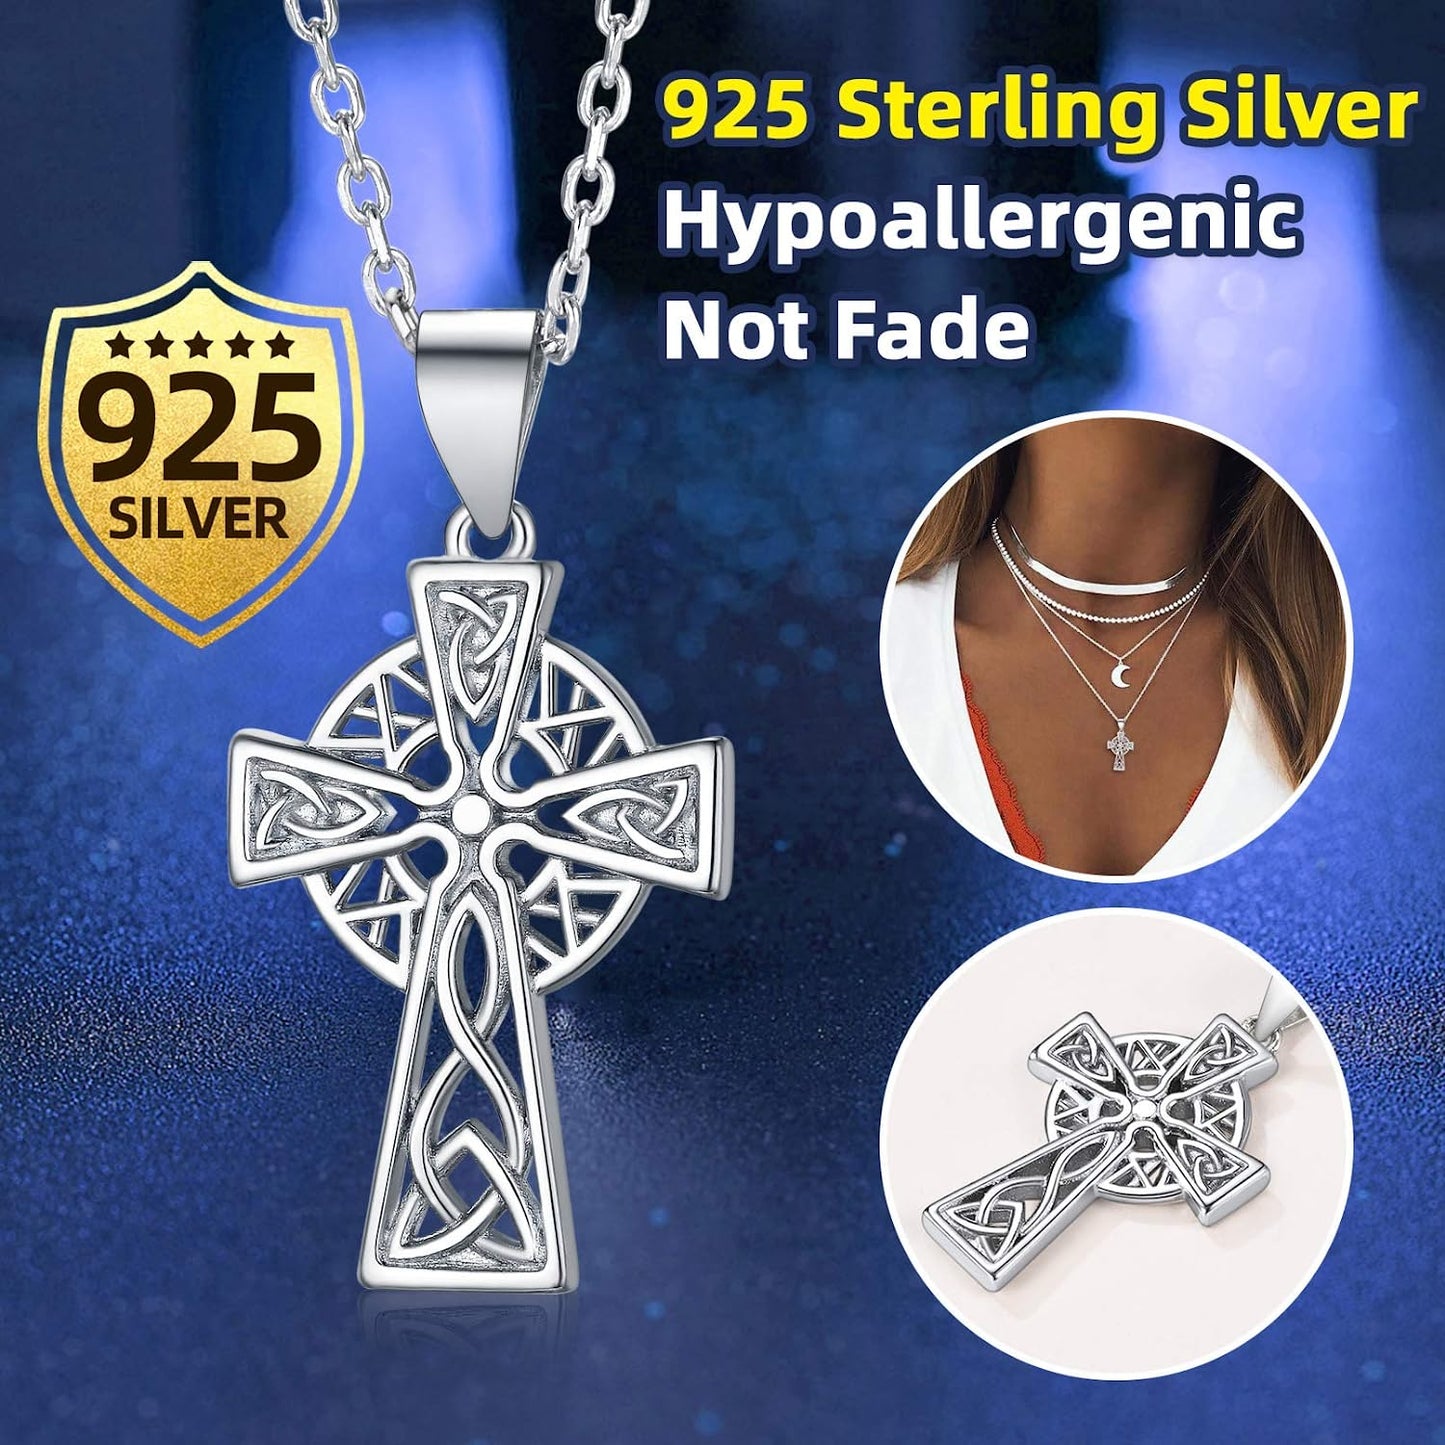 FaithHeart Celtic Knot Pendant Necklace Sterling Silver Irish Jewelry for Women Men Heart/Triangle Vintage/Cross Pendant Necklaces with 20 in Rolo Chain